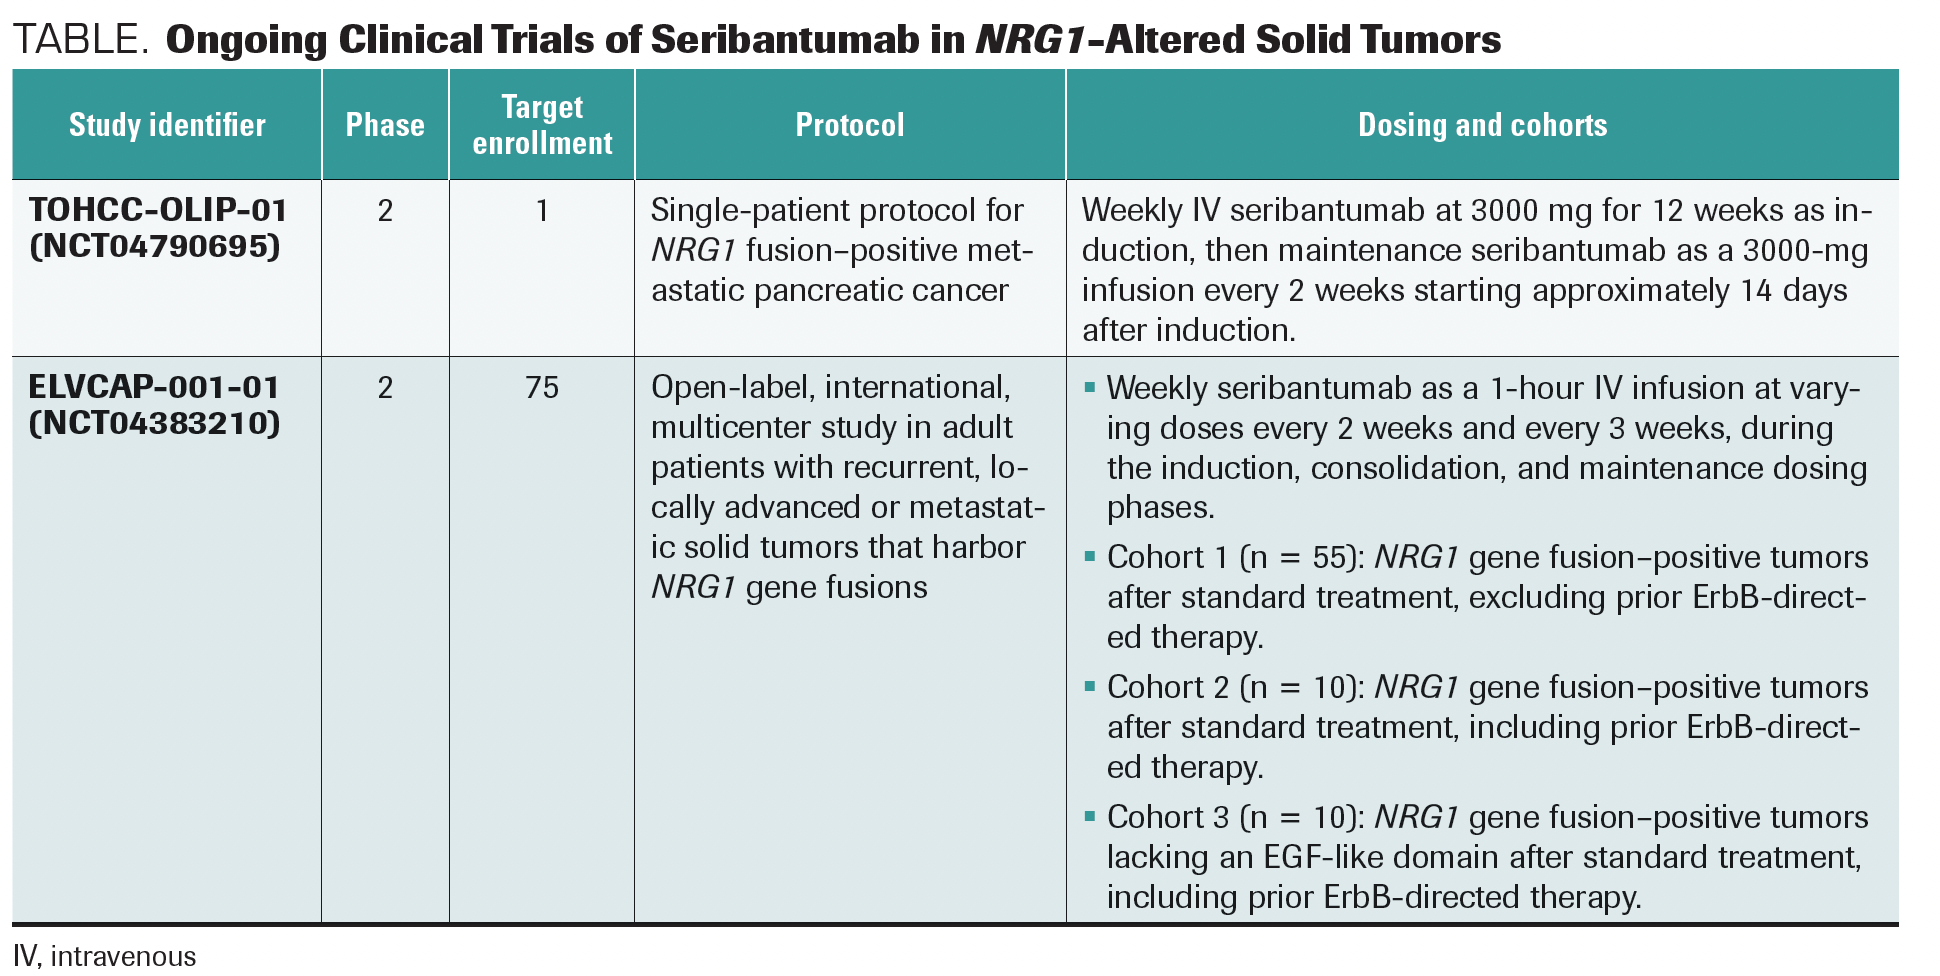 TABLE. Ongoing Clinical Trials of Seribantumab in NRG1-Altered Solid Tumors